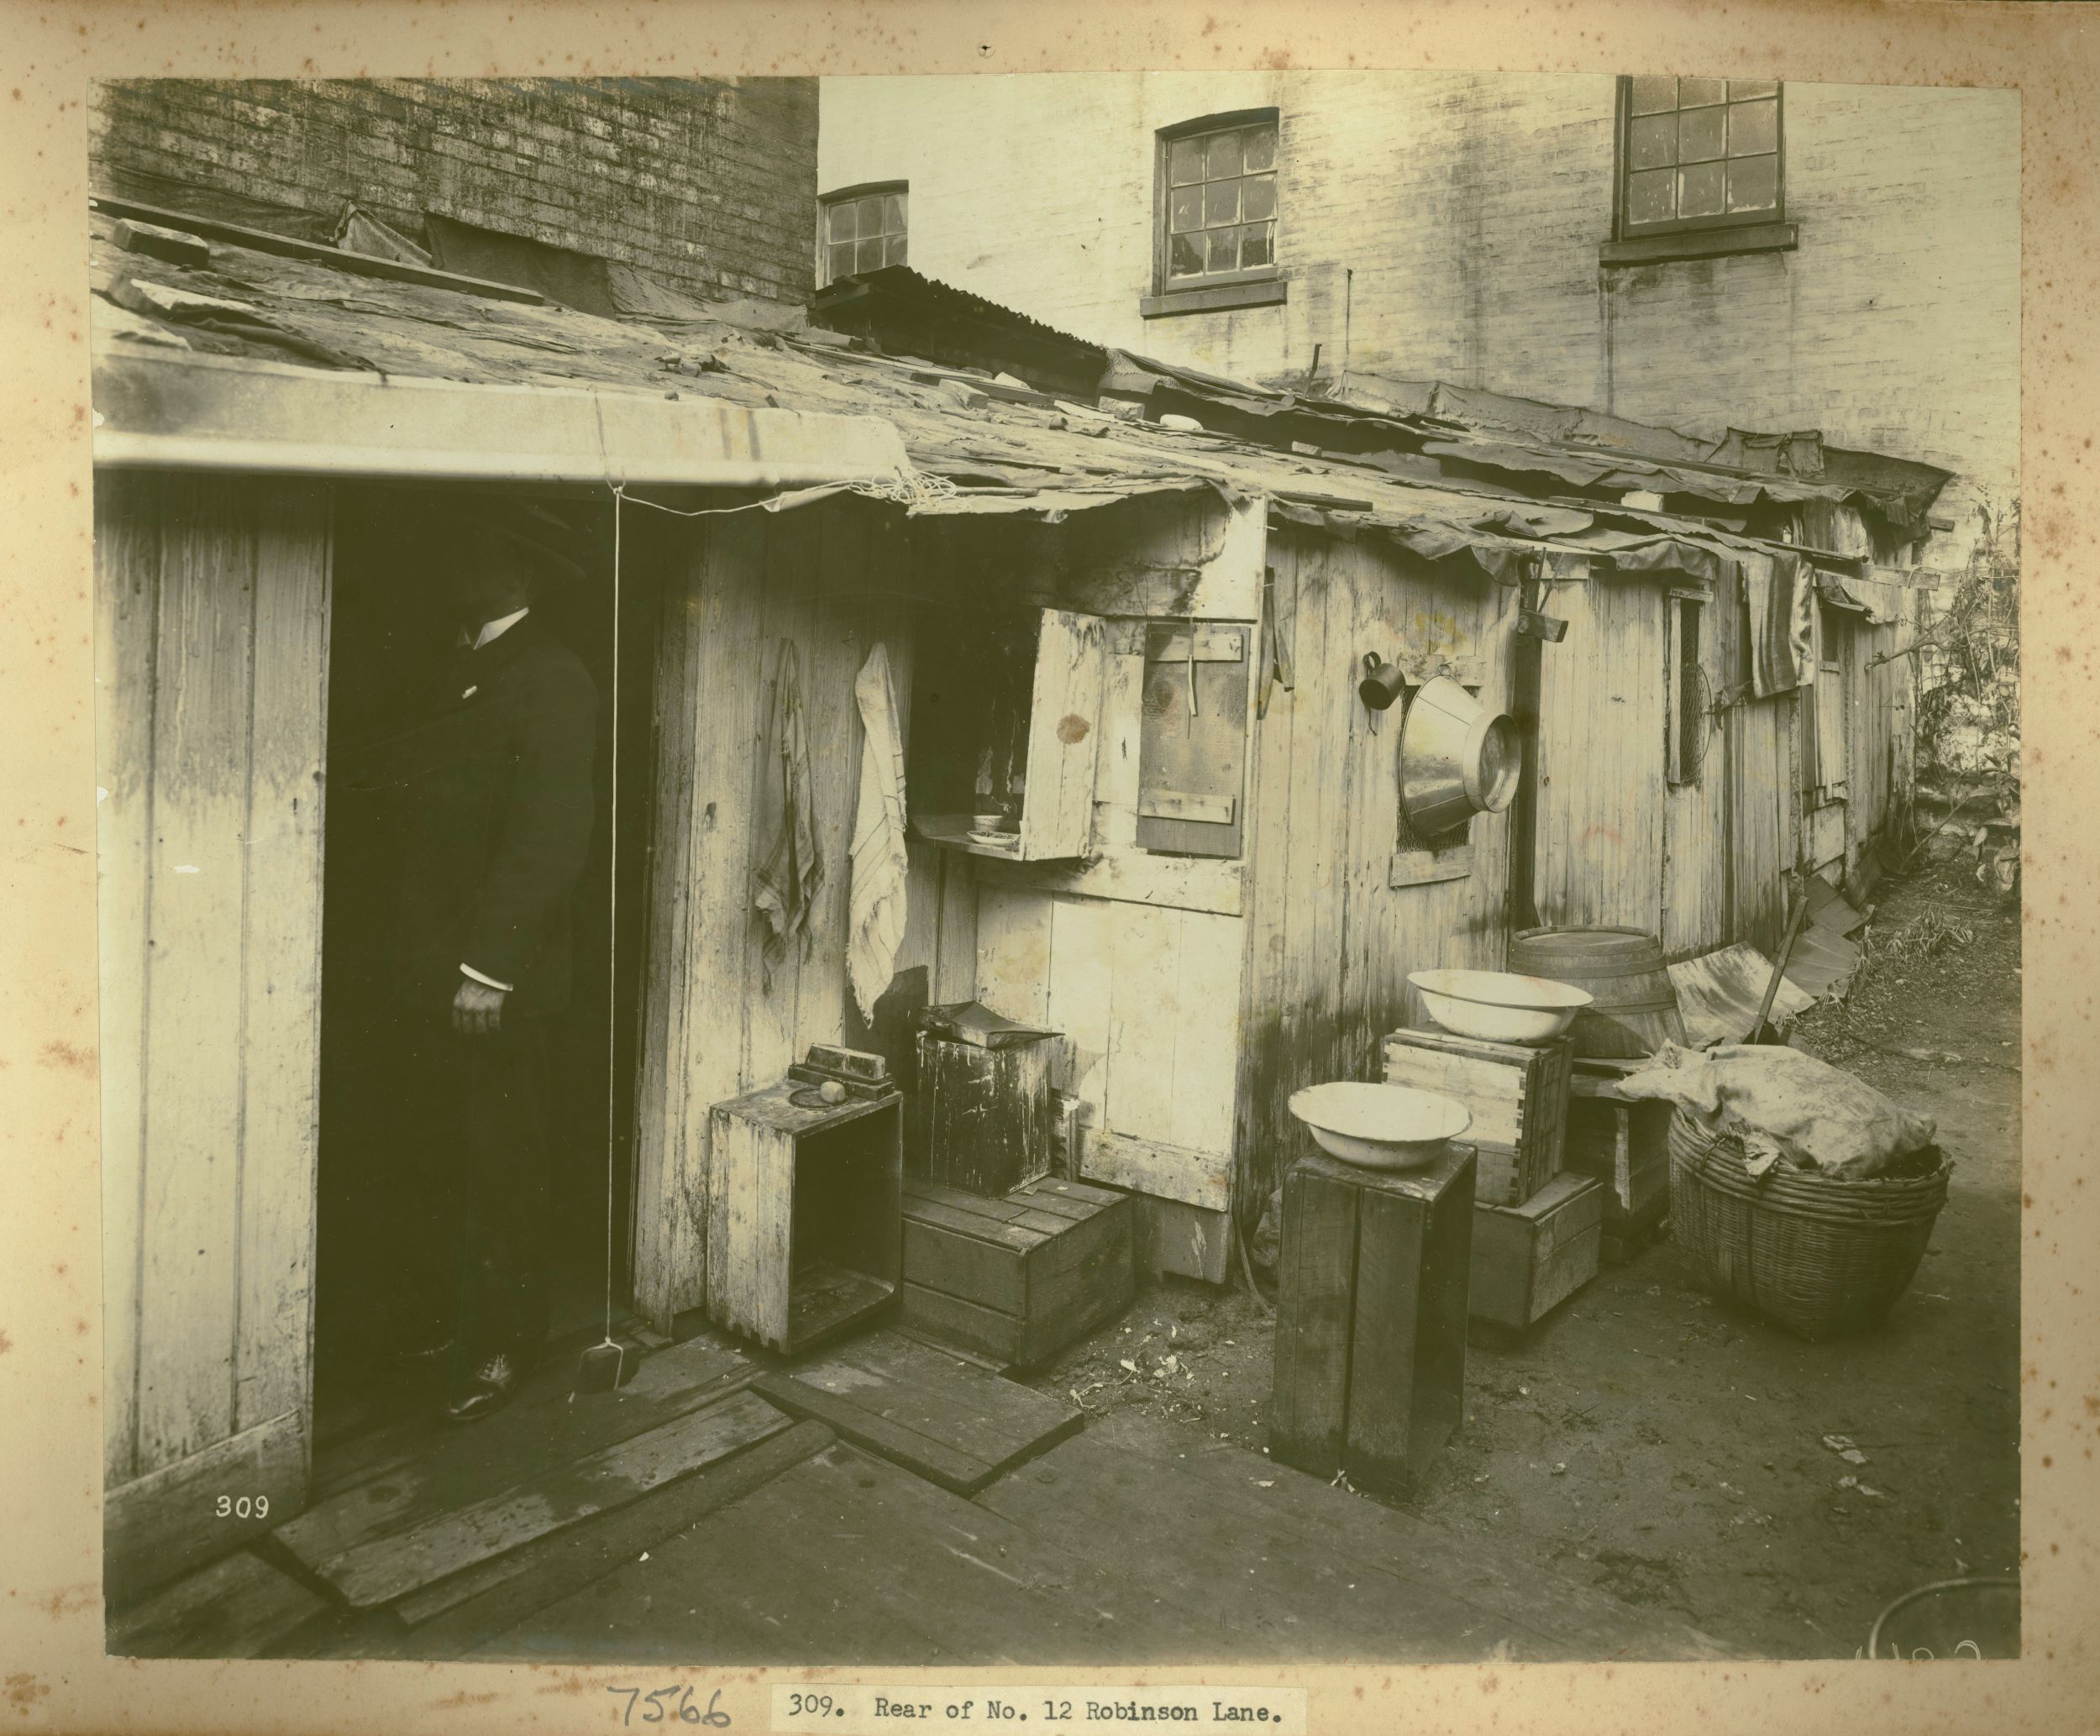 A man stands in the doorway at the rear of a house. Outside are pots and large bowls sitting on upturned wooden crates